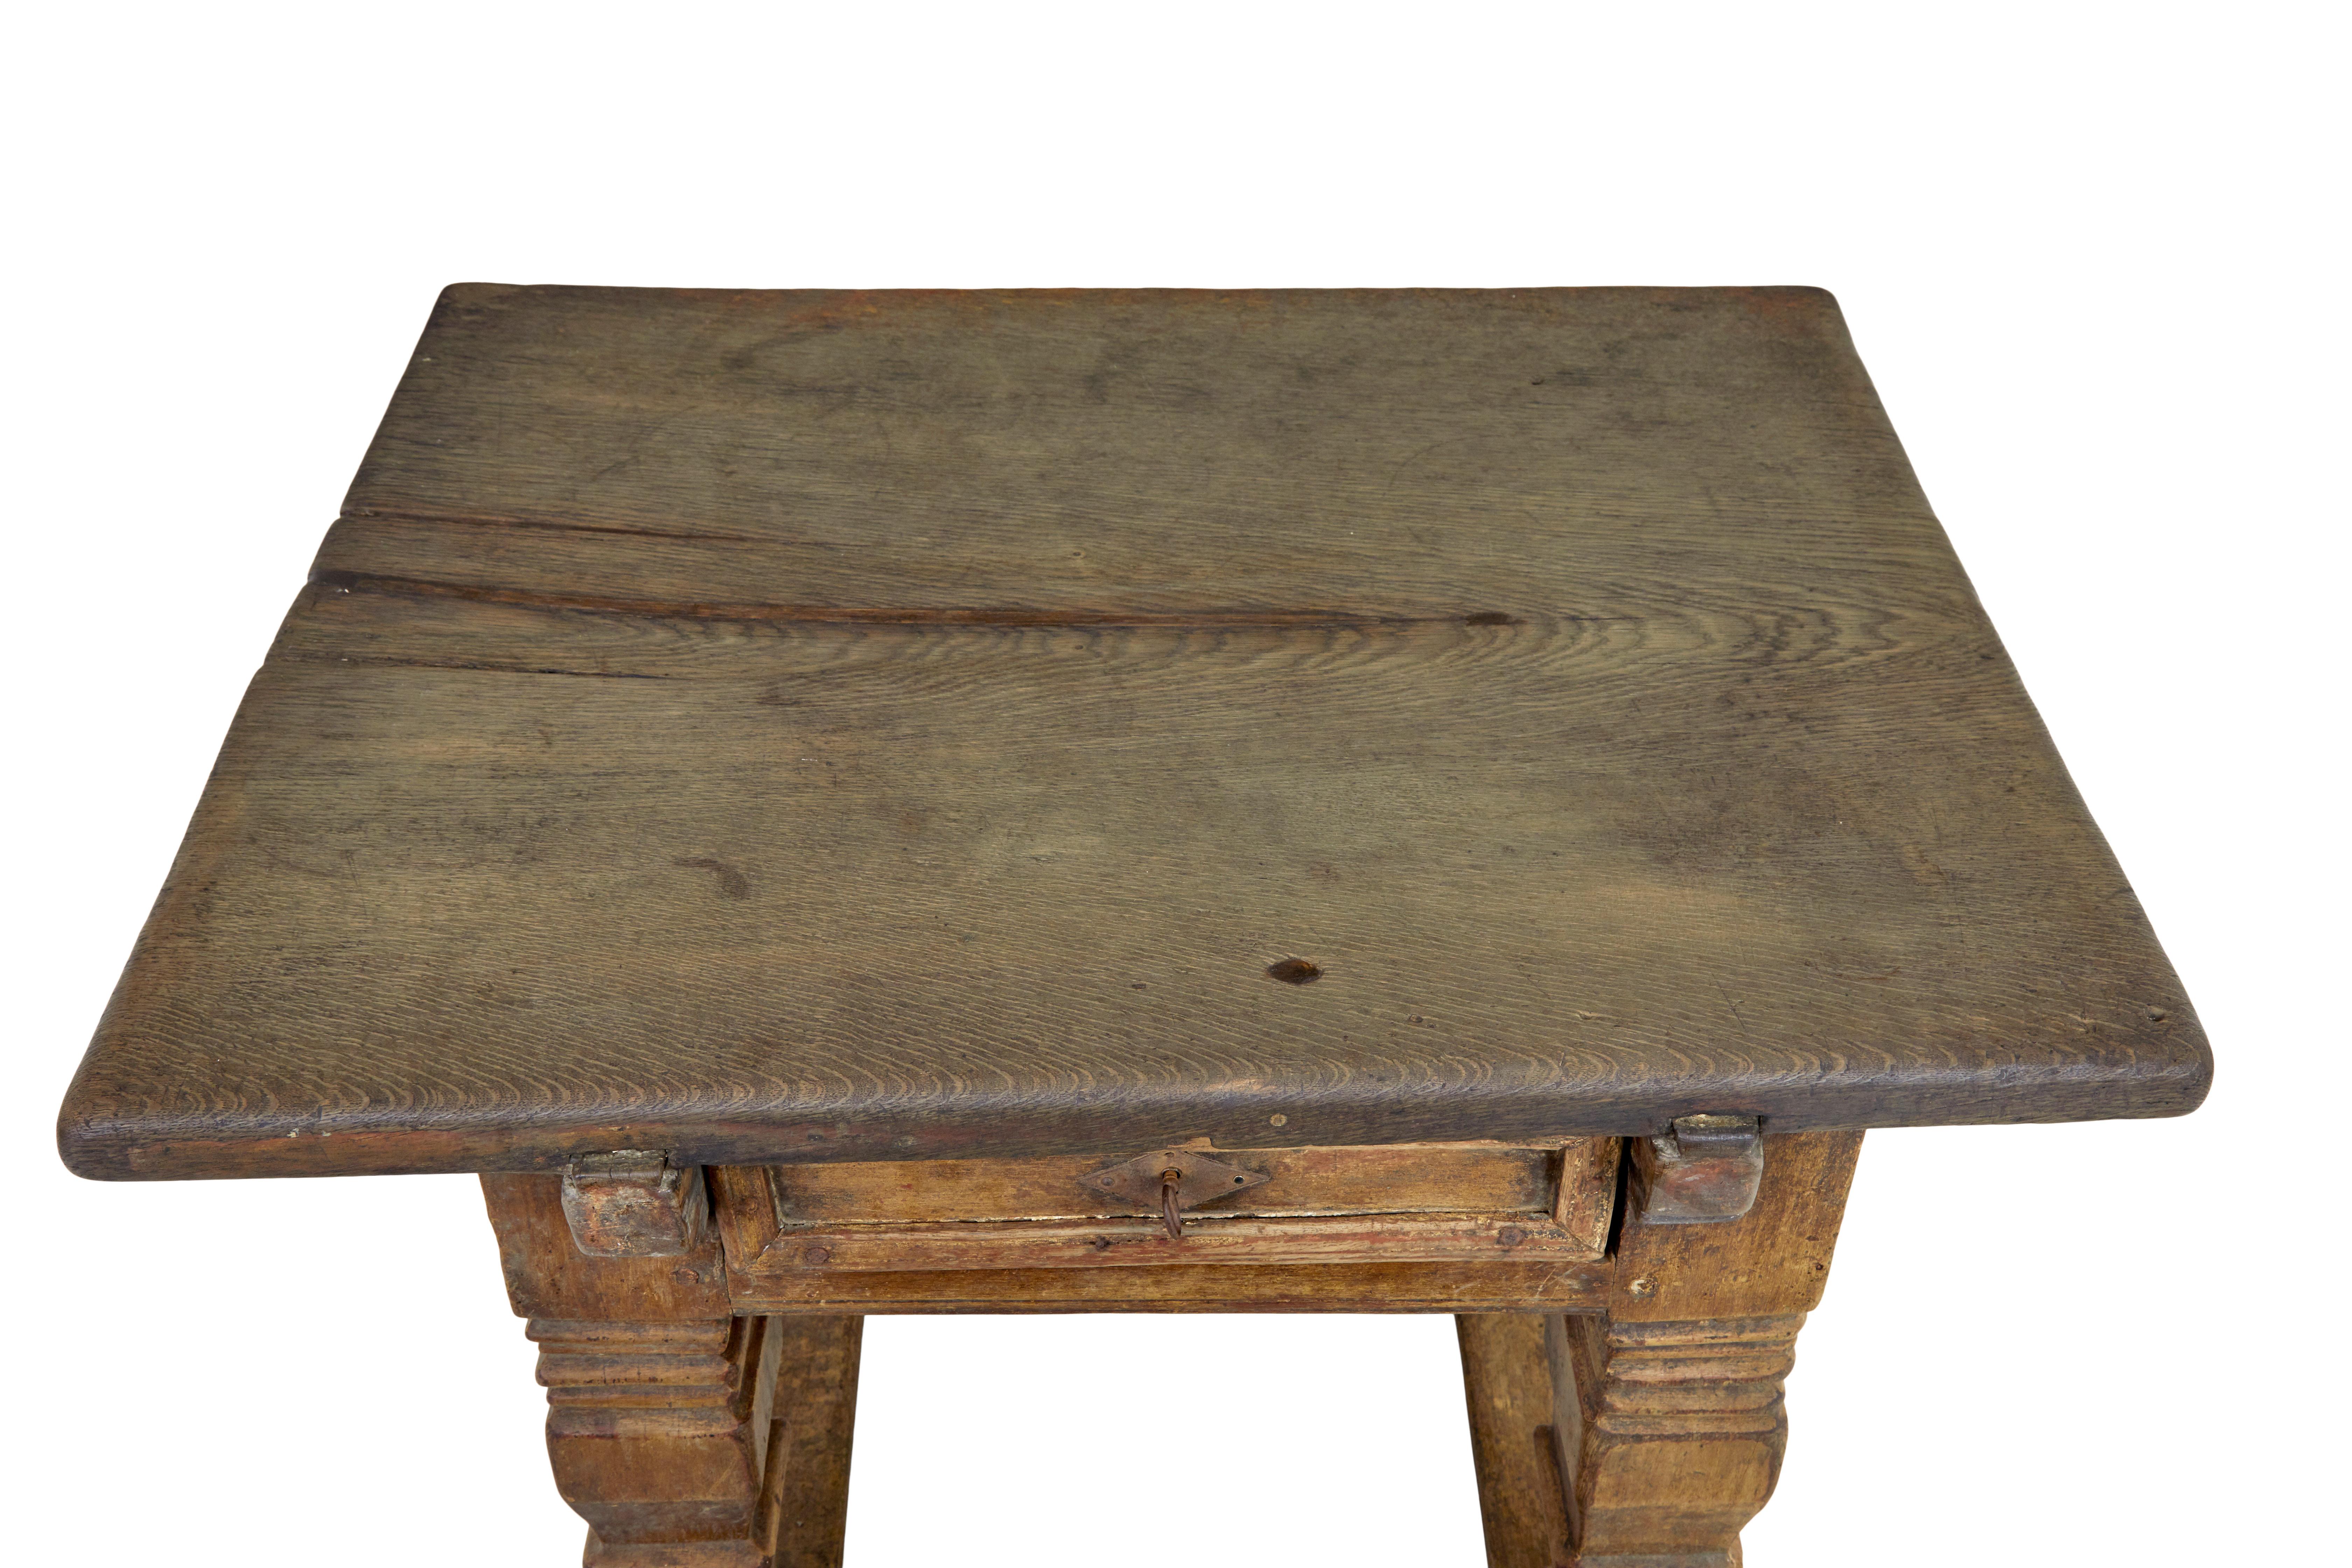 Flemish 17th century carved oak table circa 1690.

We are pleased to offer this 17th century table which was often called a rent table.

Over-sailing solid oak top which has now been restored with a piece let in and areas of colour matched fill. 